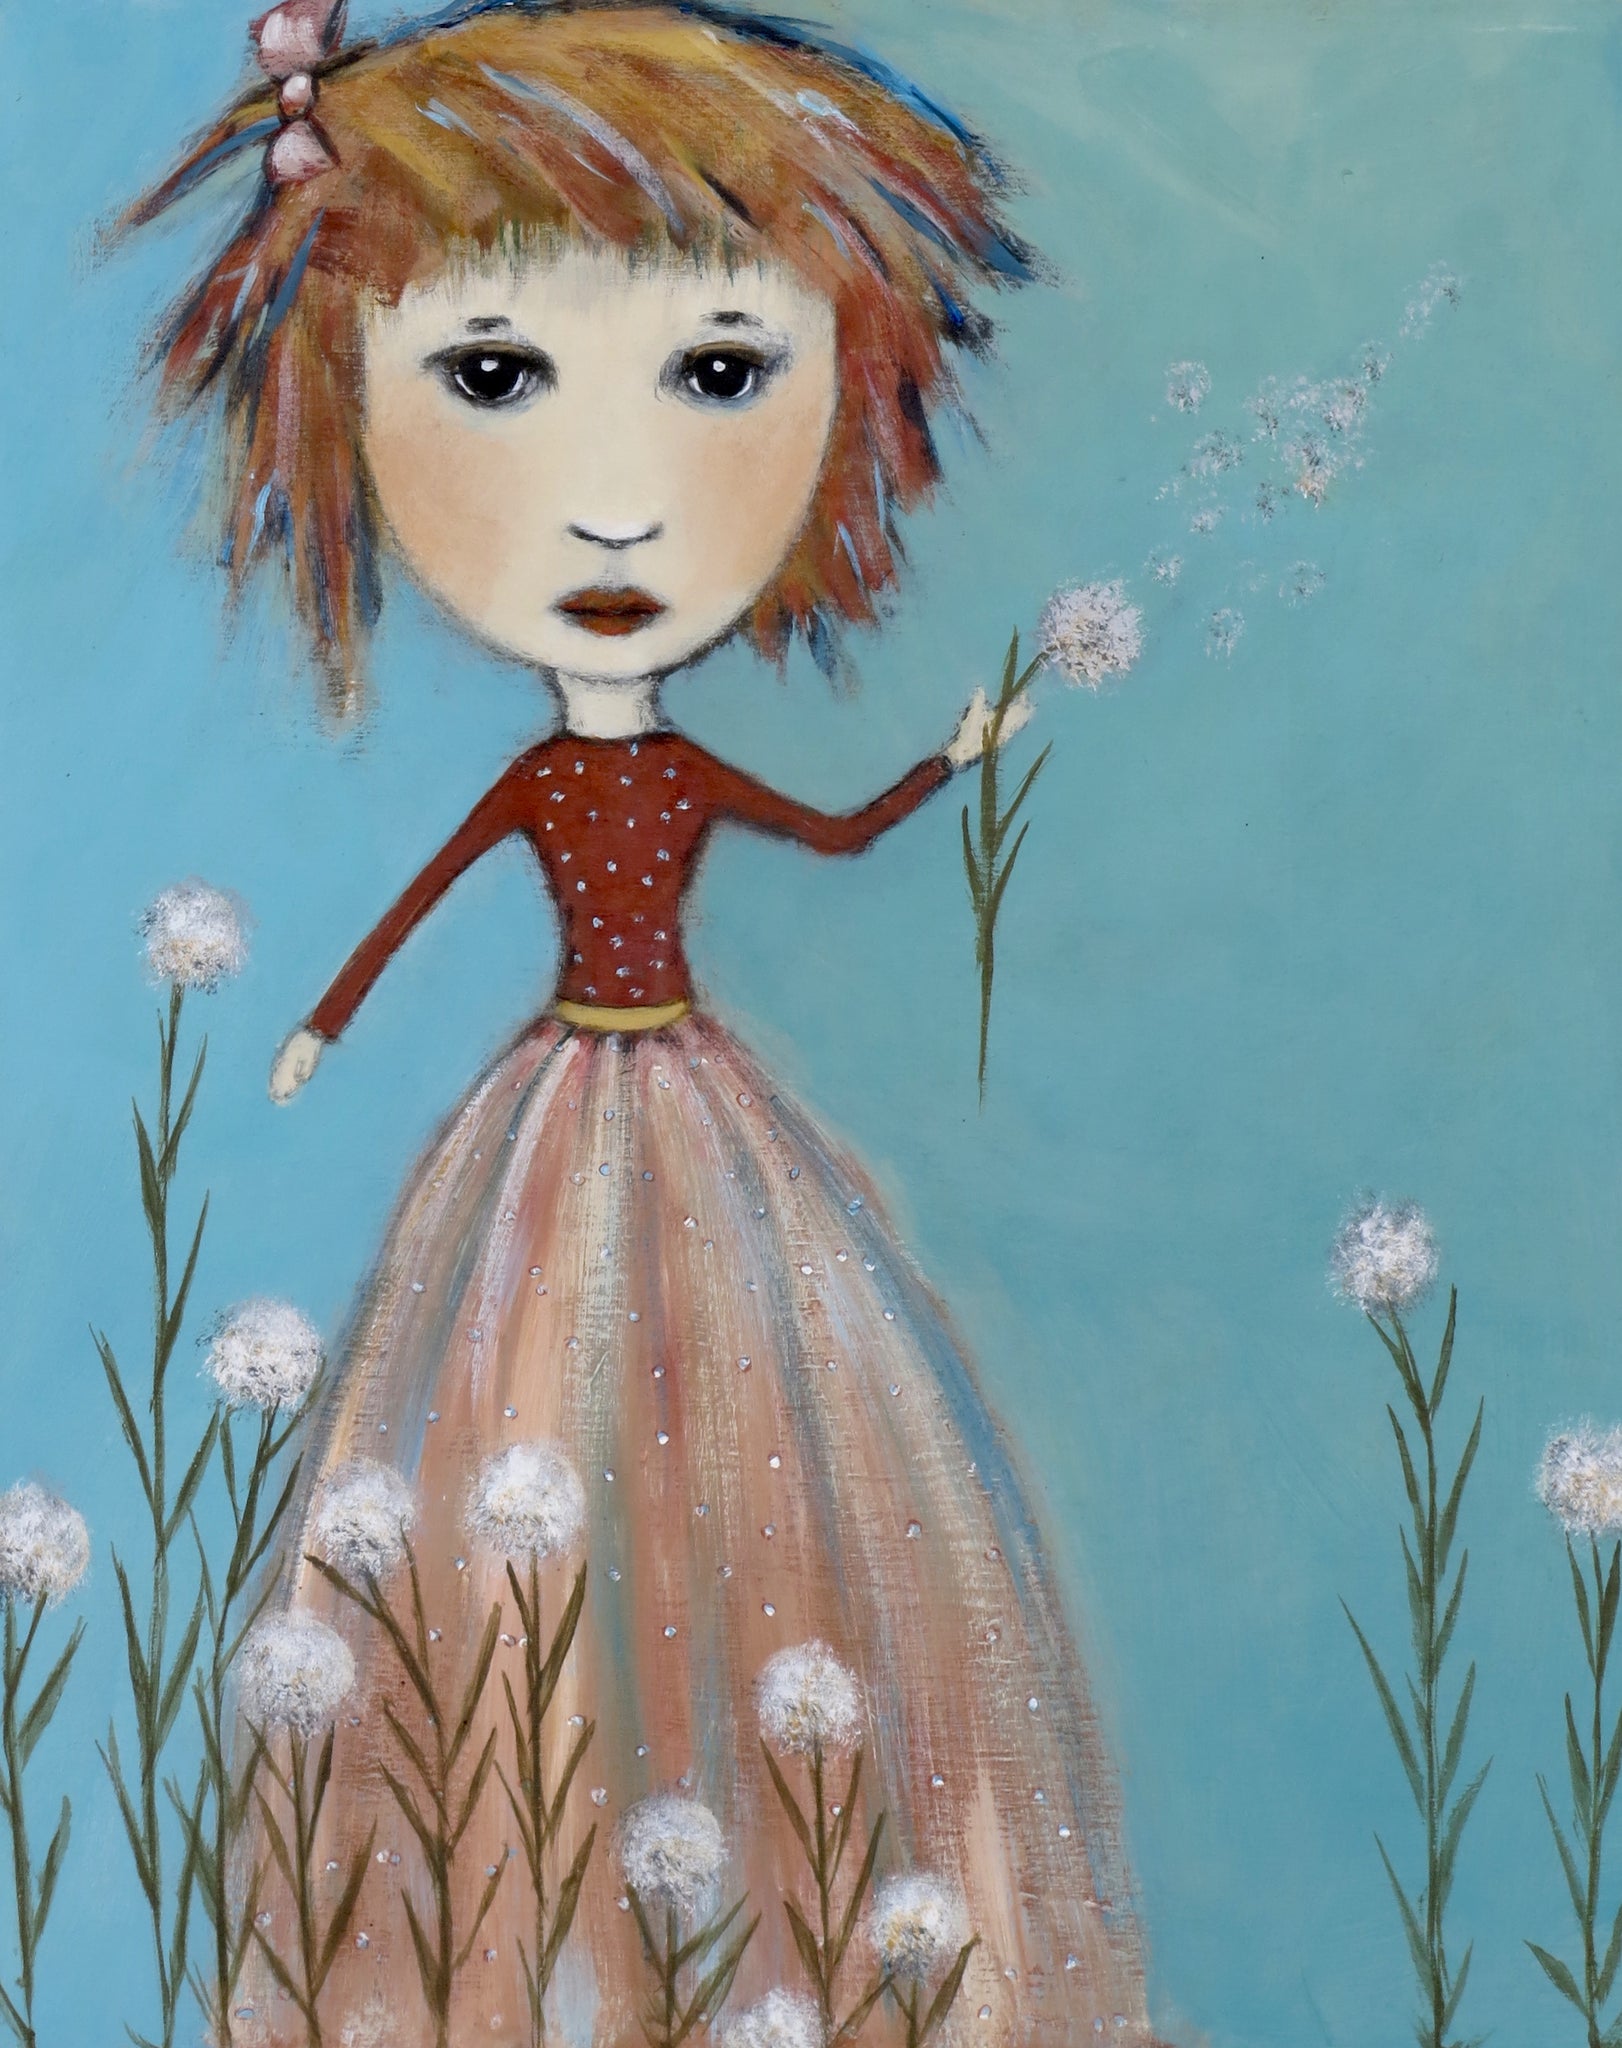 "Dandelion Girl Spreads the Seeds of Change"